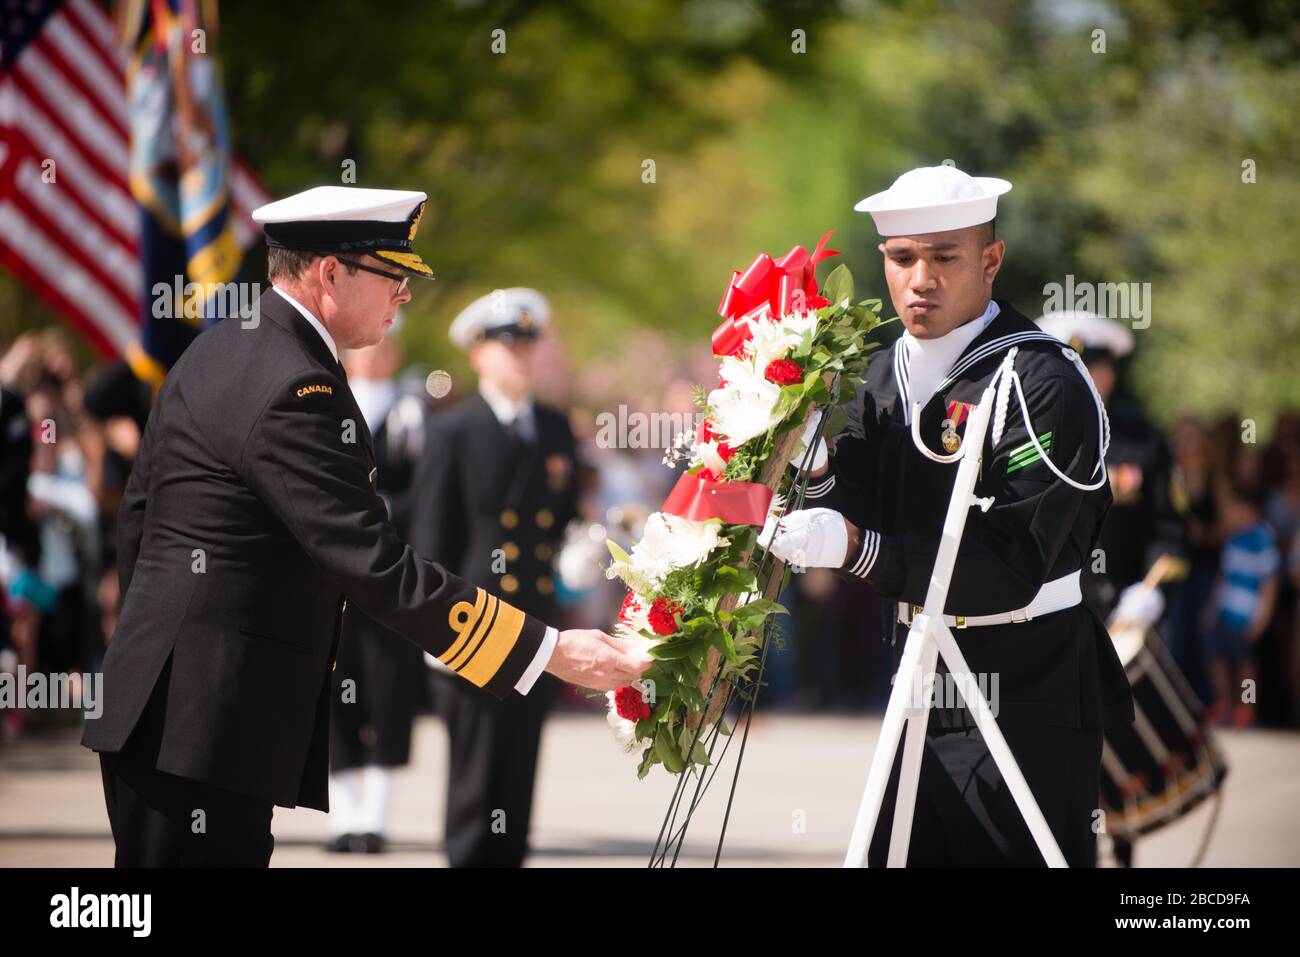 'Vice Adm. Mark Norman, commander of the Royal Canadian Navy, lays a wreath at the Tomb of the Unknown Soldier in Arlington National Cemetery, April 20, 2015, in Arlington, Va. Dignitaries from all over the world pay respects to those buried at Arlington National Cemetery in more than 3000 ceremonies each year. (U.S. Army photo by Rachel Larue/Released); 20 April 2015, 15:31; Commander of the Royal Canadian Navy lays a wreath at Tomb of the Unknown Soldier, Arlington National Cemetery; Arlington National Cemetery; ' Stock Photo